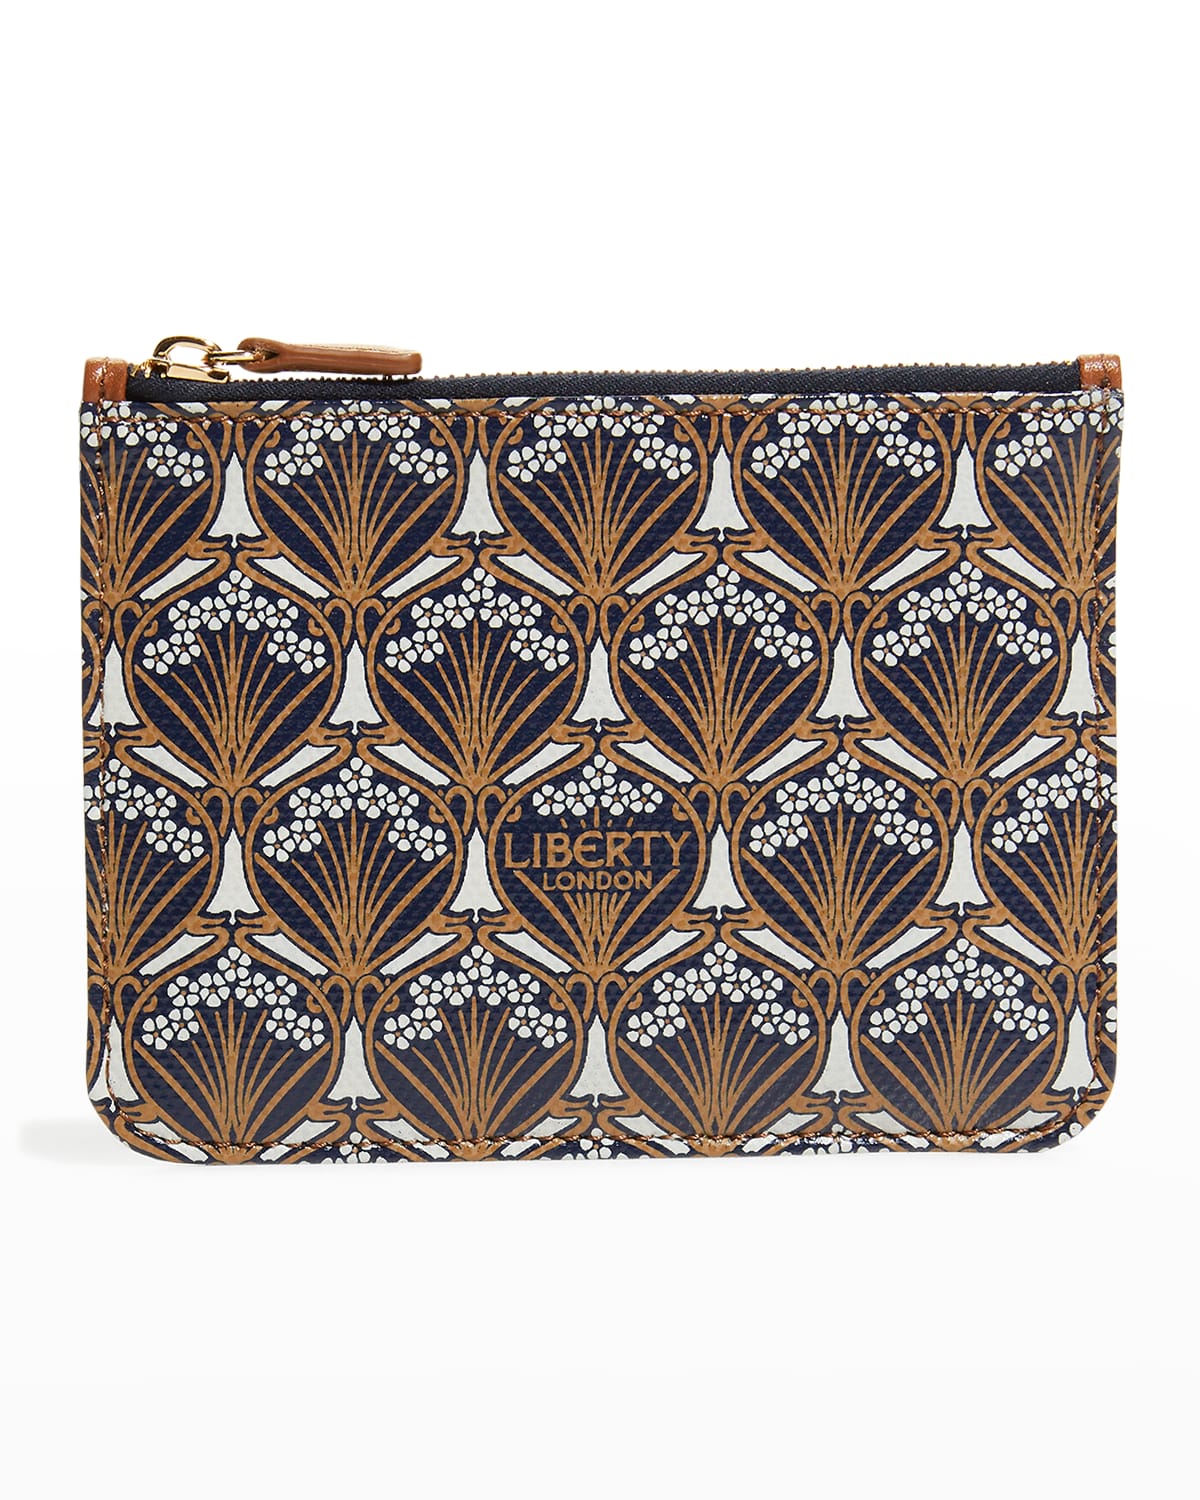 Liberty London Iphis Printed Zip Coin Pouch